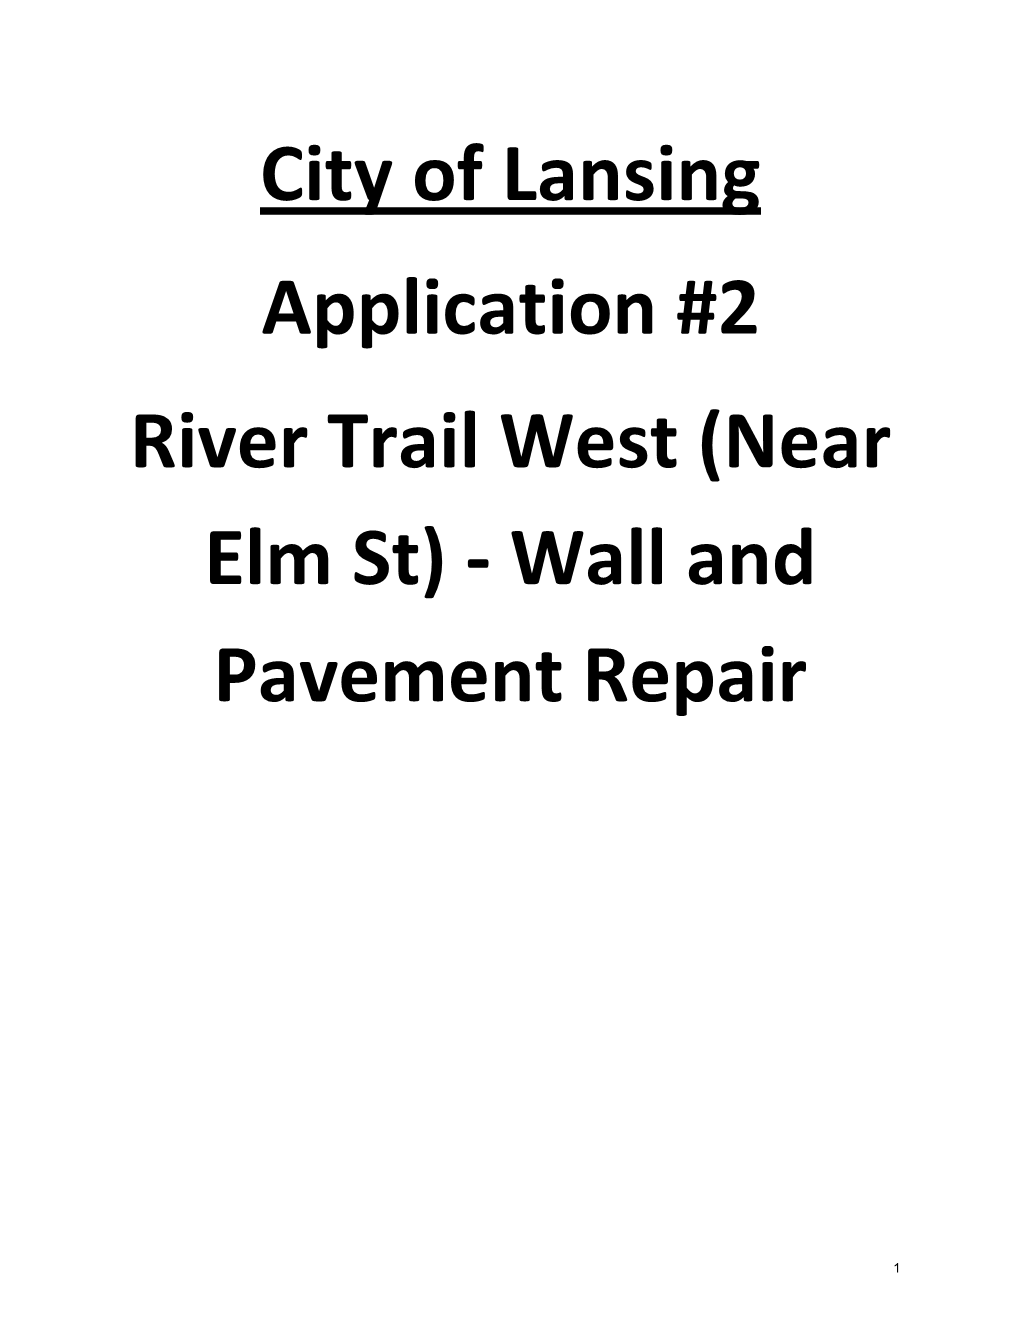 City of Lansing Application #2 River Trail West (Near Elm St) - Wall and Pavement Repair